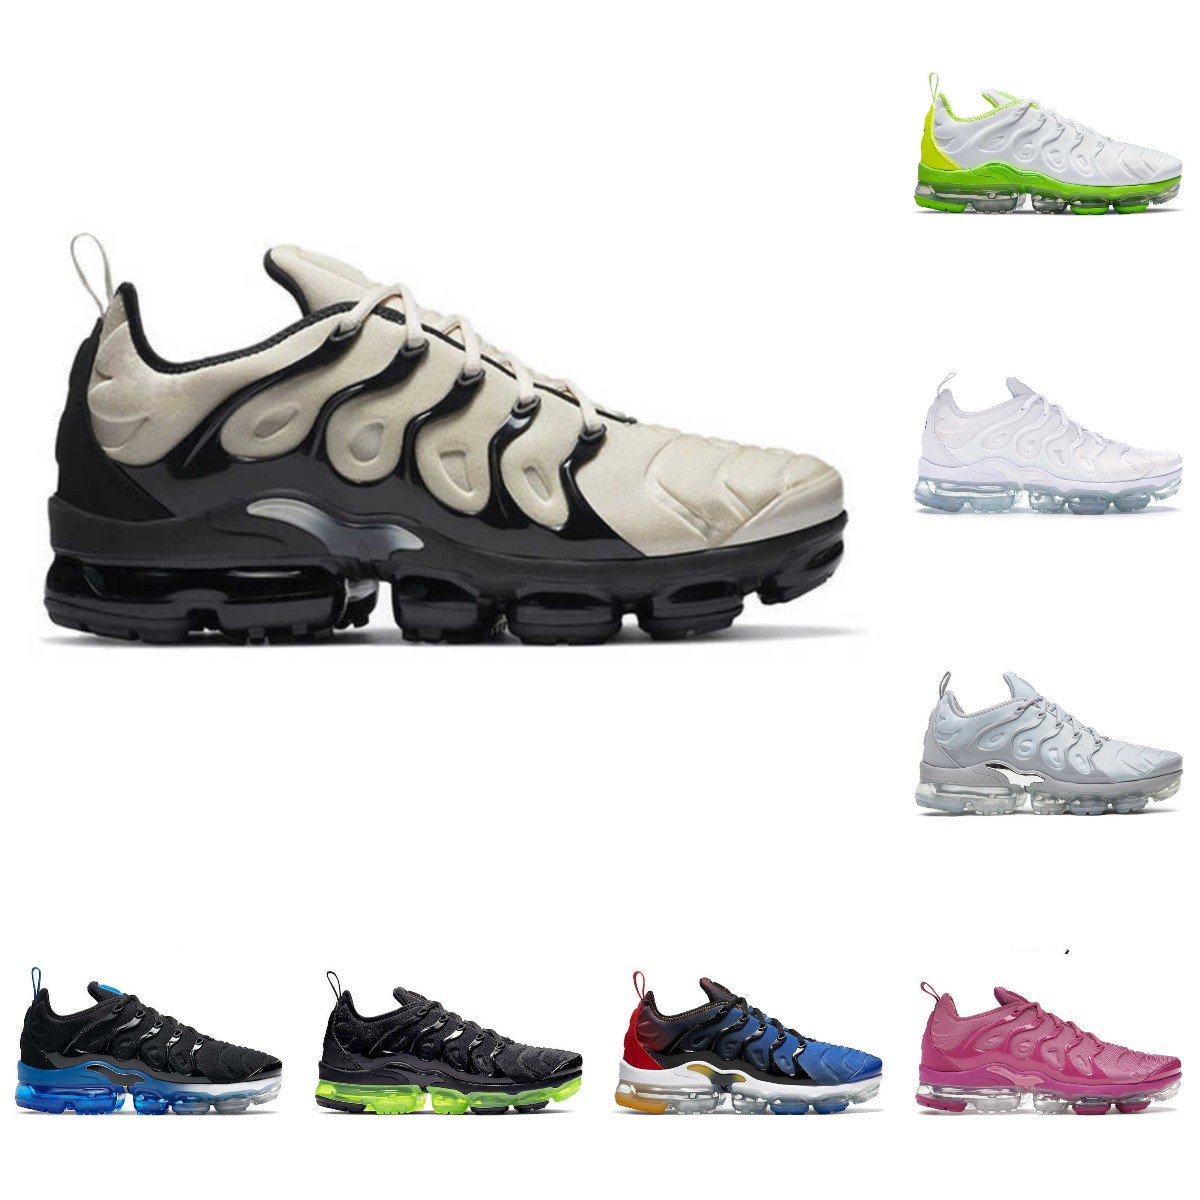 

2022 Tn Plus Men Women Airs Cushion Running Shoes Vapores Triple Trainer Black Red Blue Royal Volt Griffey Tns Requin Psychic Pink Designer Sports Sneakers SS55, Please contact us